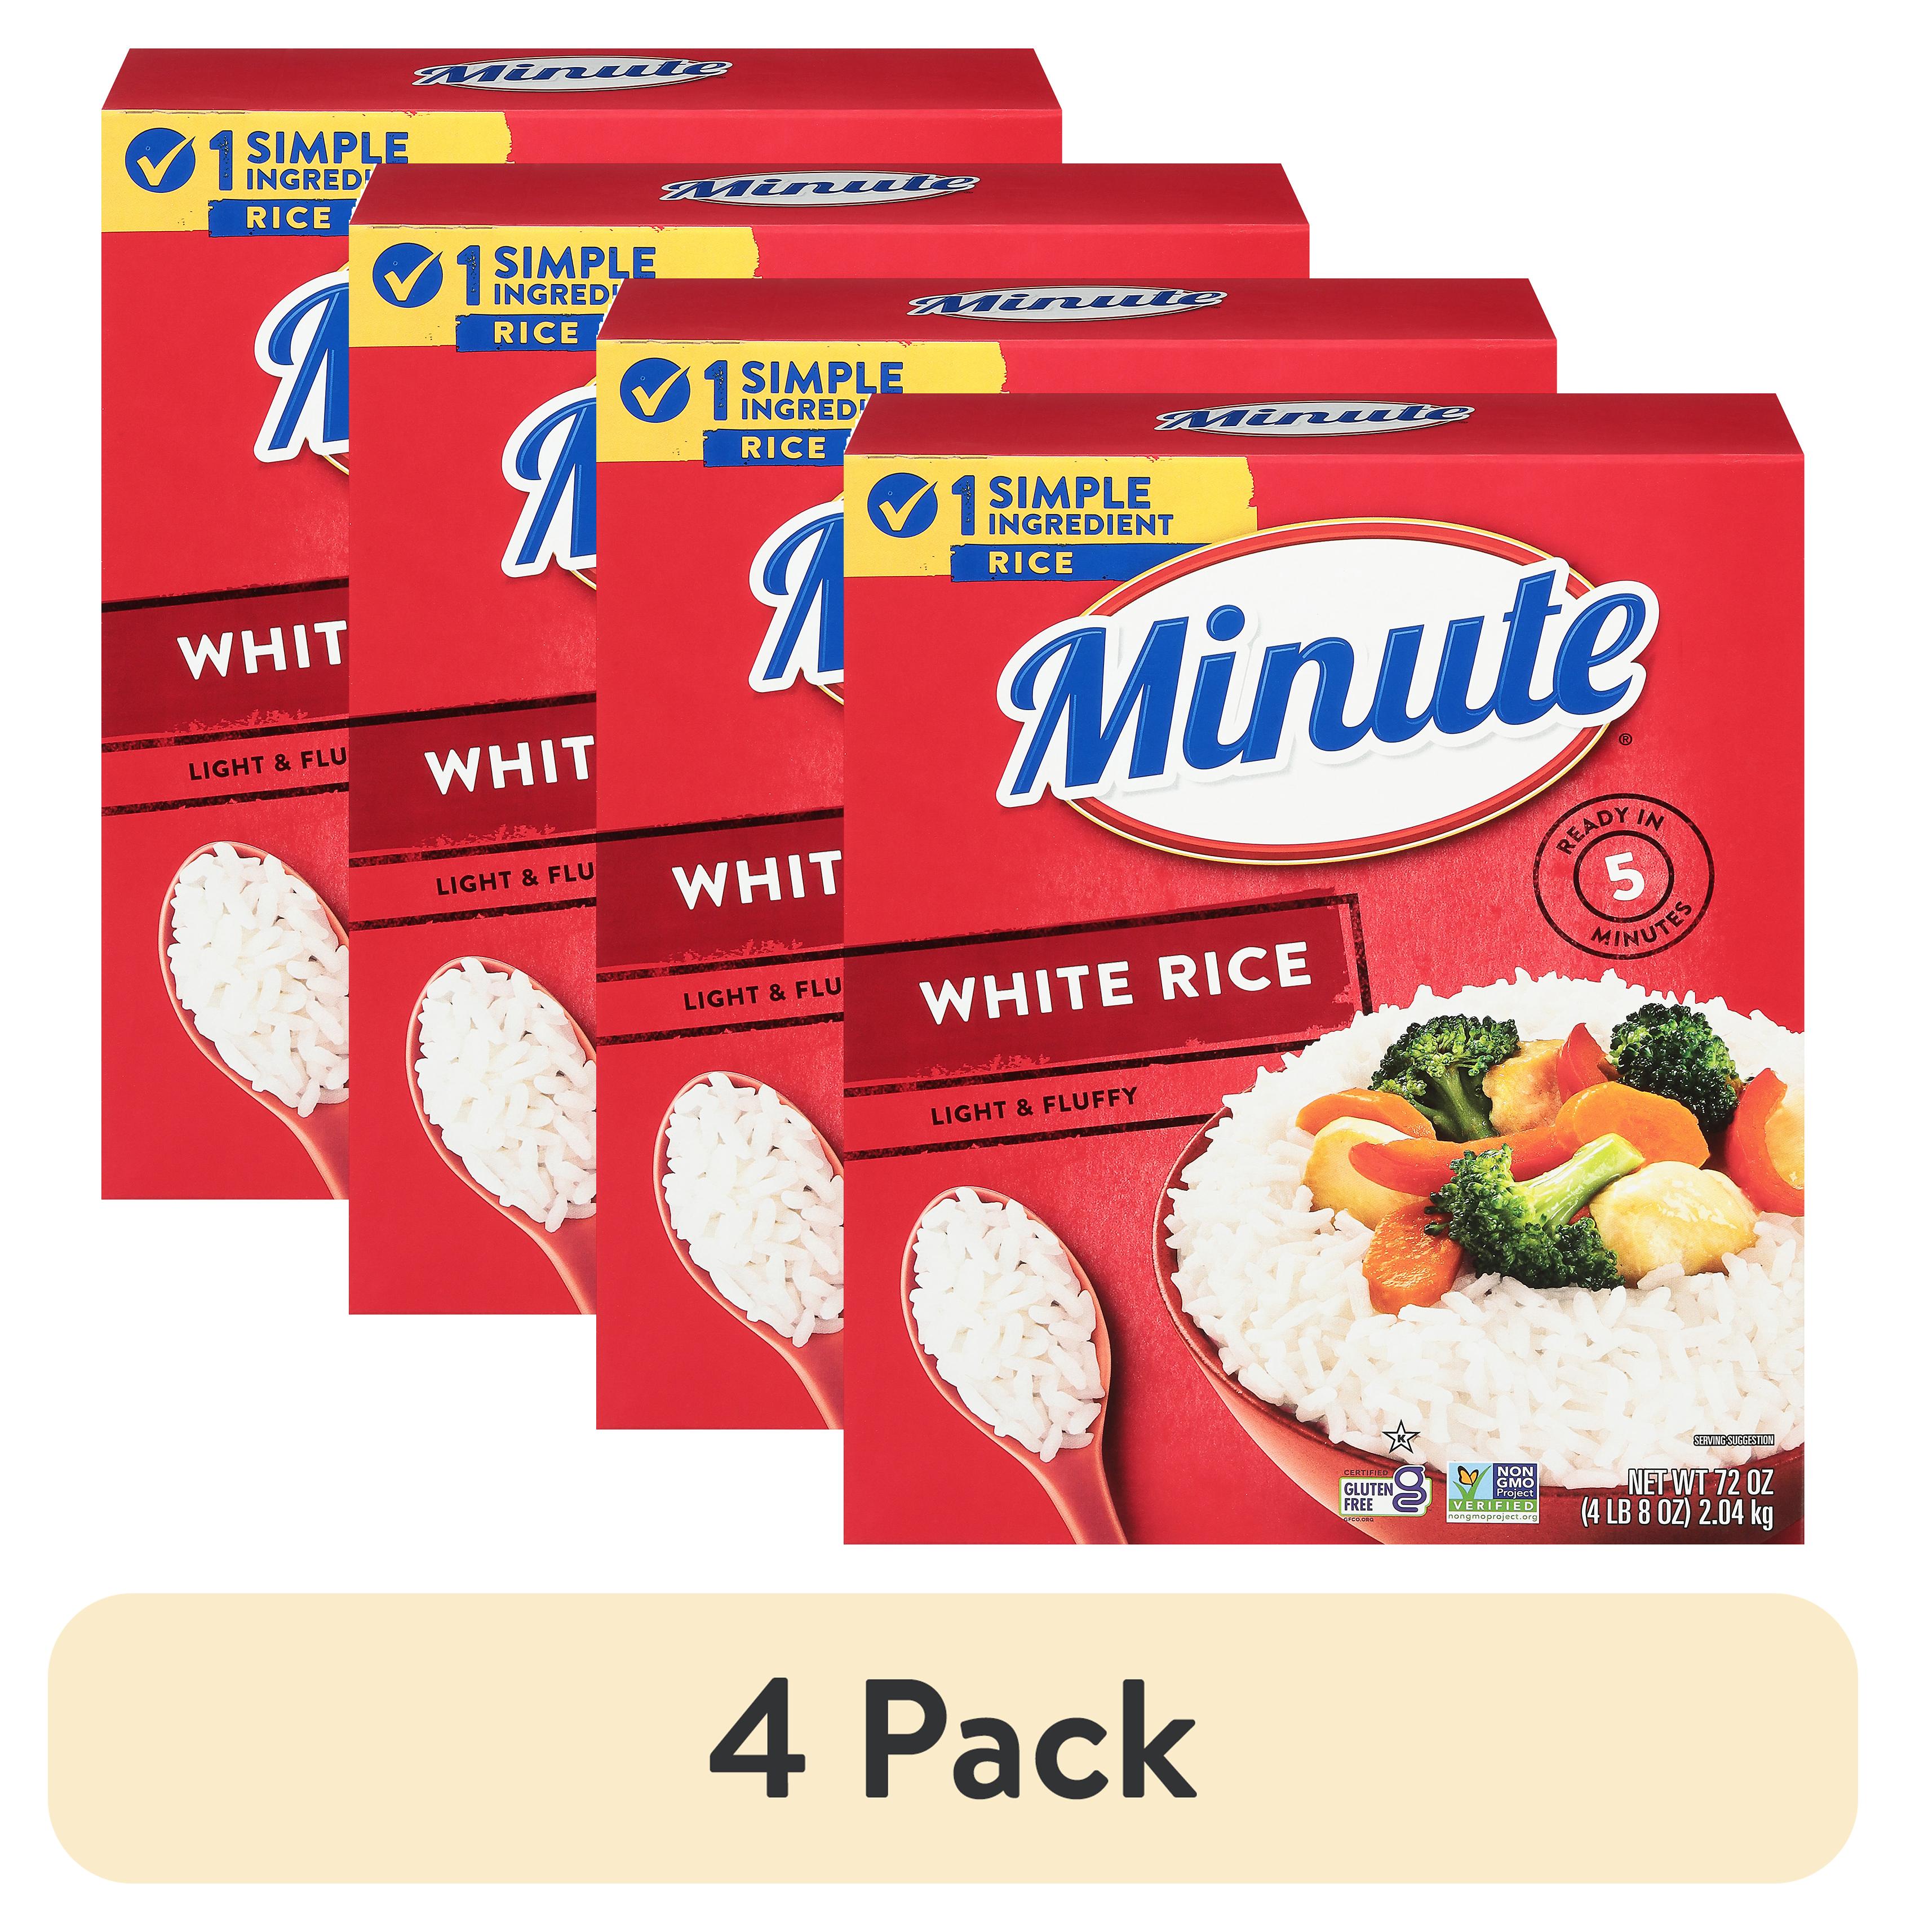 (4 pack) Minute Instant White Rice, Light and Fluffy, 72 oz - image 1 of 9